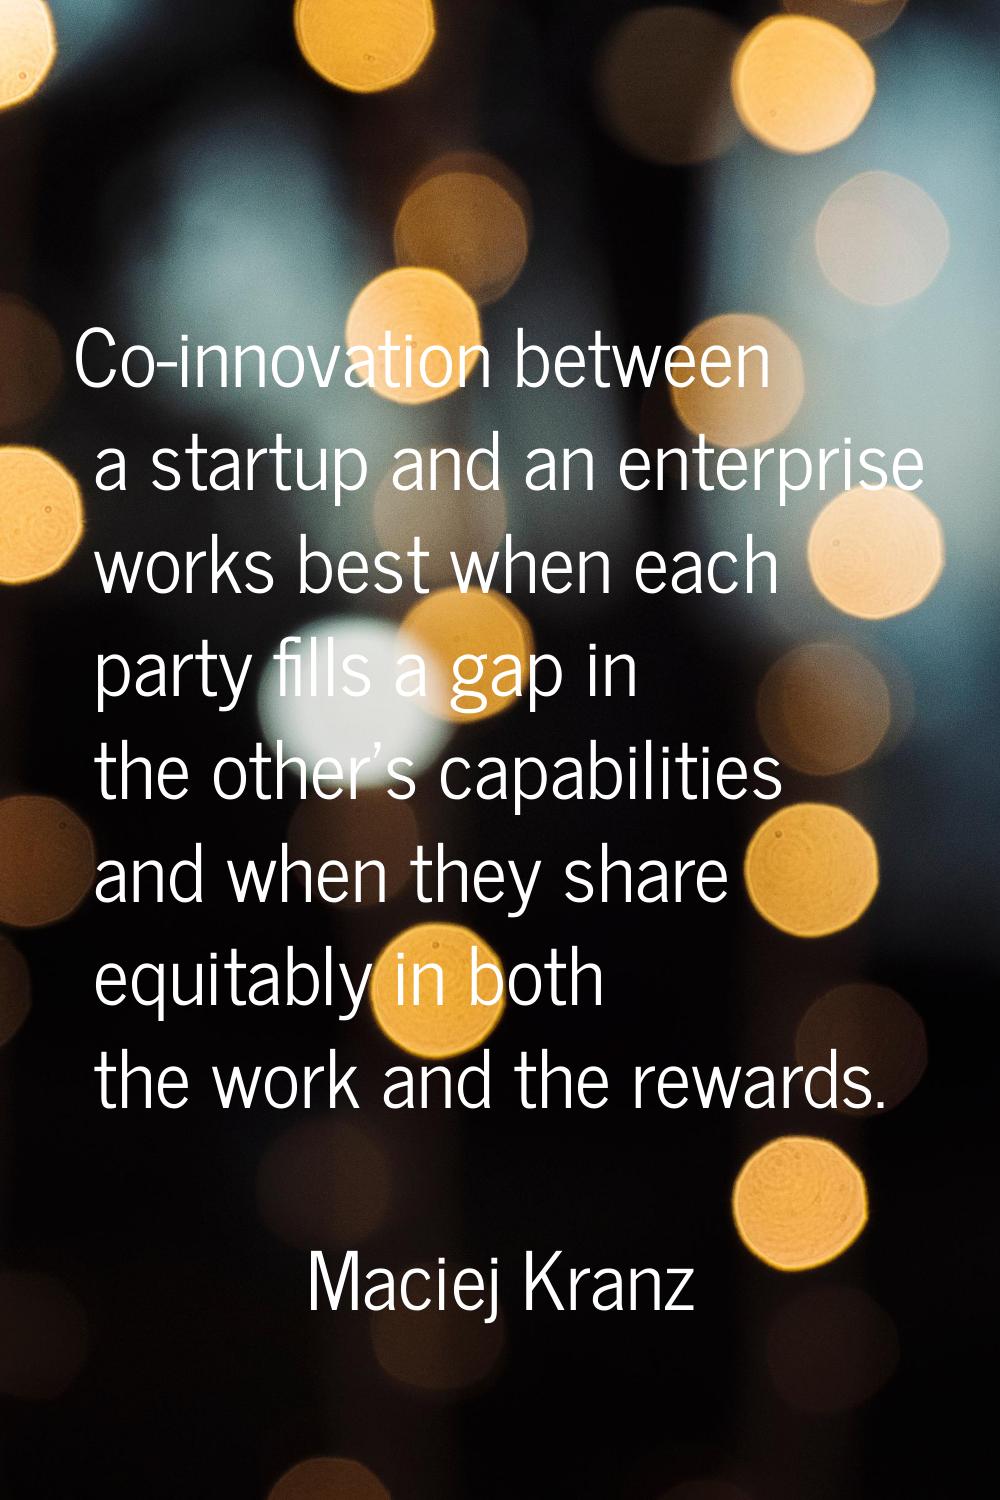 Co-innovation between a startup and an enterprise works best when each party fills a gap in the oth